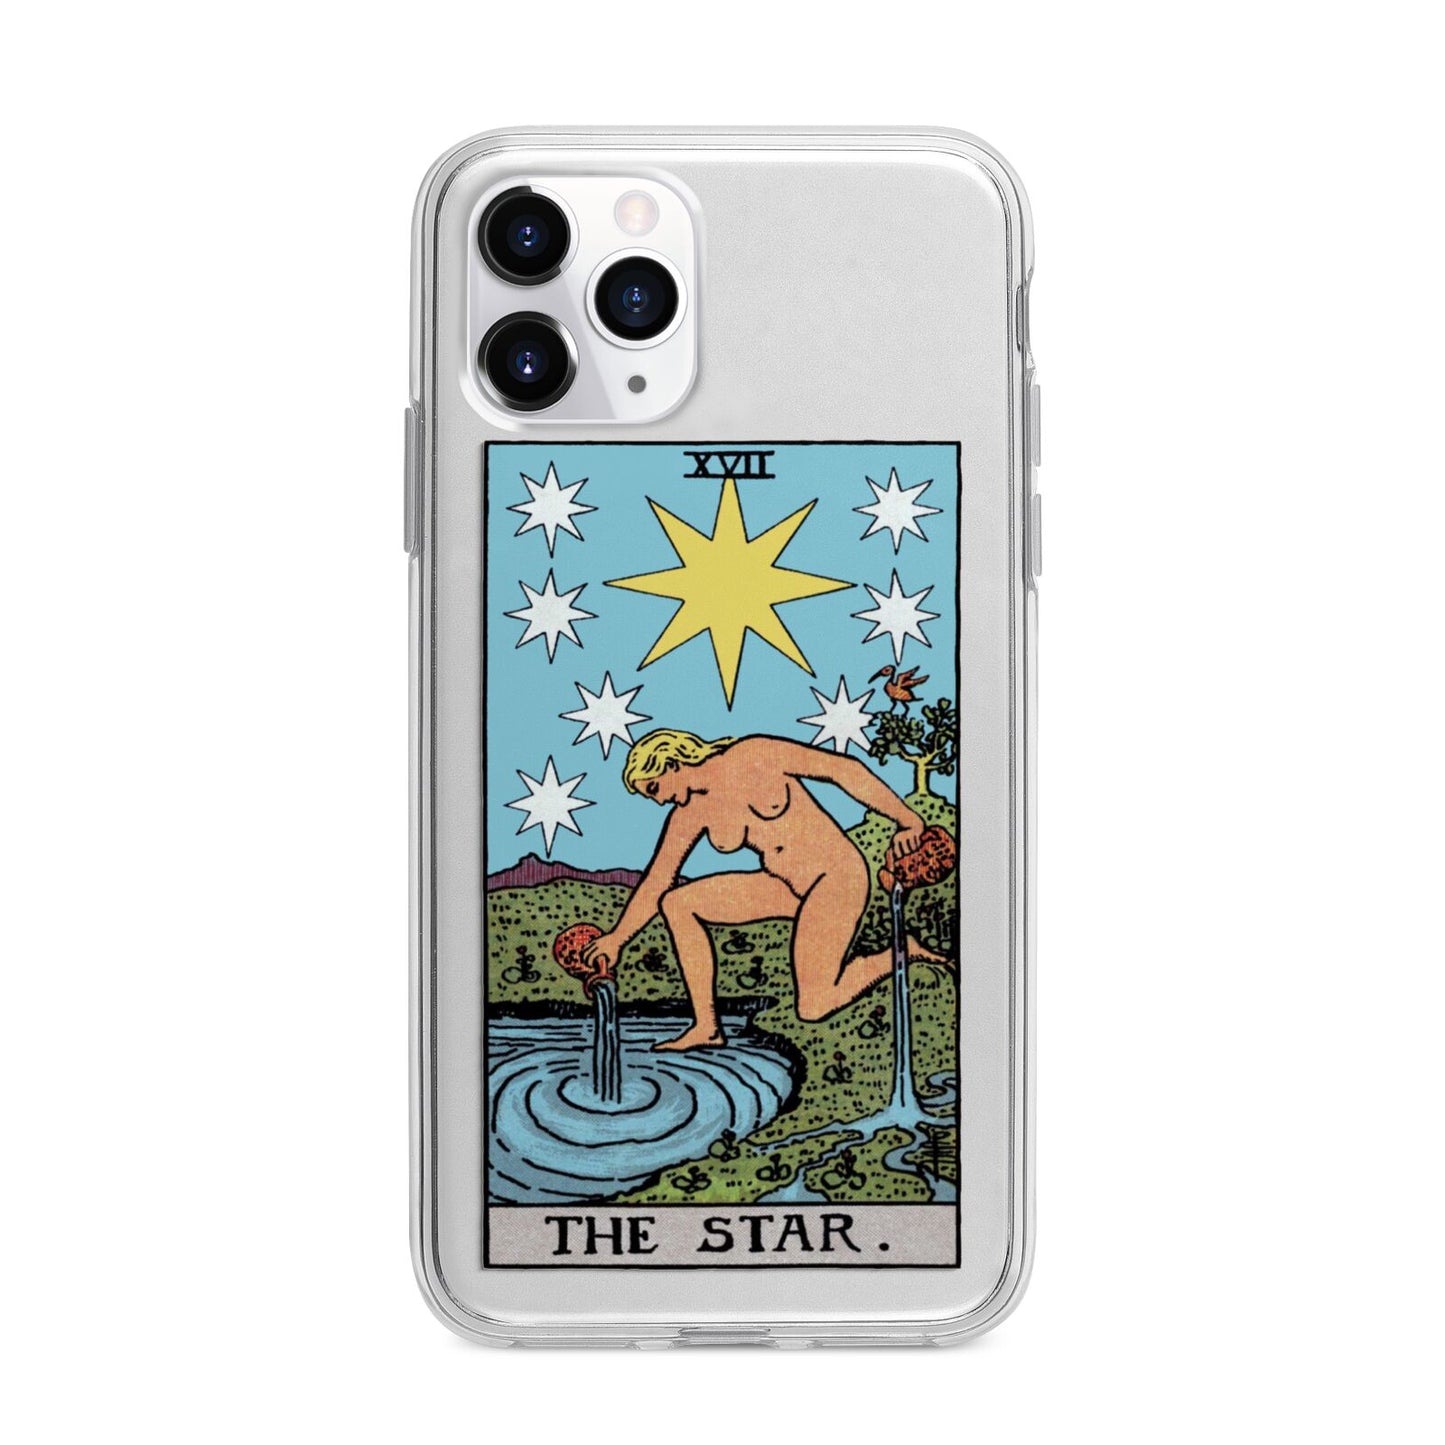 The Star Tarot Card Apple iPhone 11 Pro Max in Silver with Bumper Case